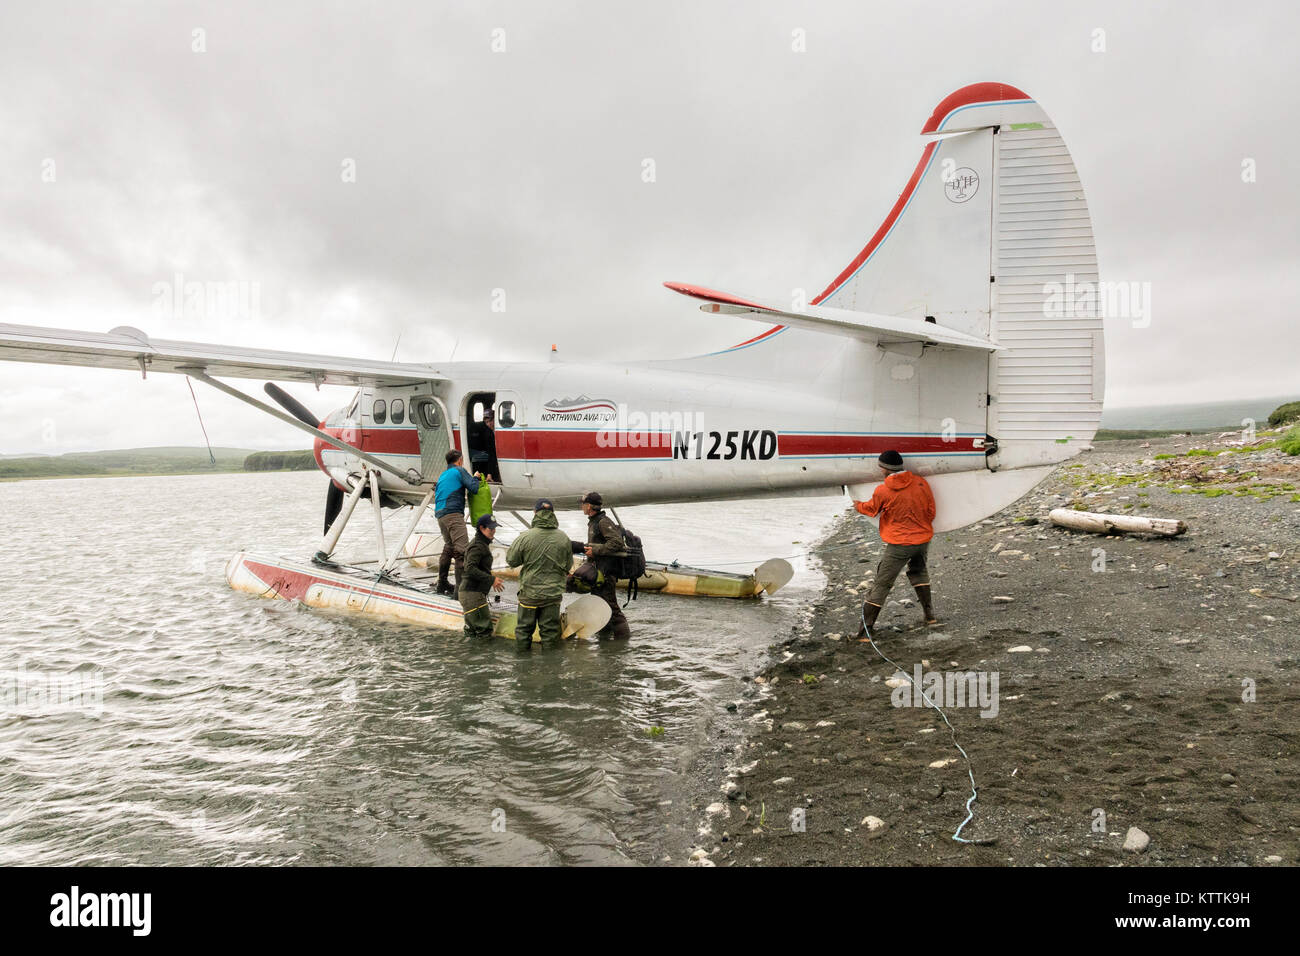 Passengers unload a de Havilland DHC-3 Otter seaplane after landing at the remote McNeil River Game Sanctuary in the Katmai Peninsula, Alaska. The float plane is the only way in and out of the remote location known for the highest concentration of brown bears in the world. Stock Photo